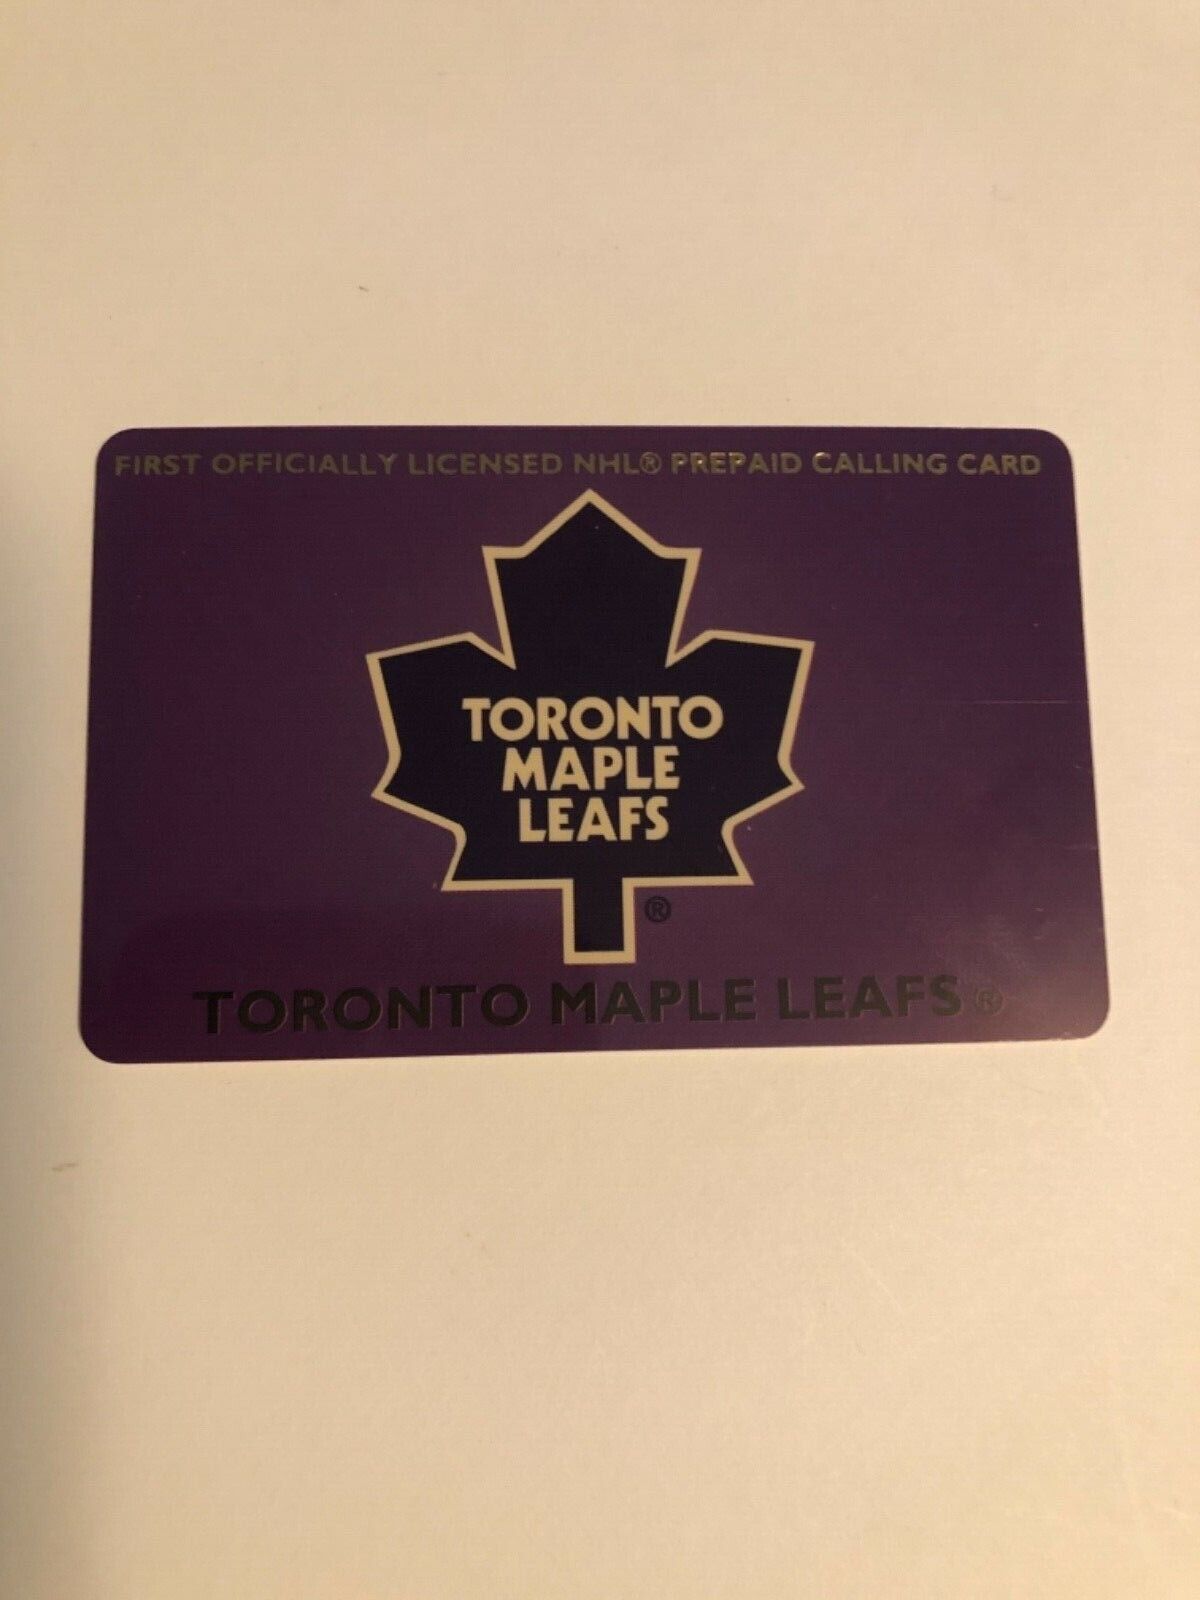 Toronto Maple Leafs Phone Card $10 First Officiallly Licensed NHL Phone Card